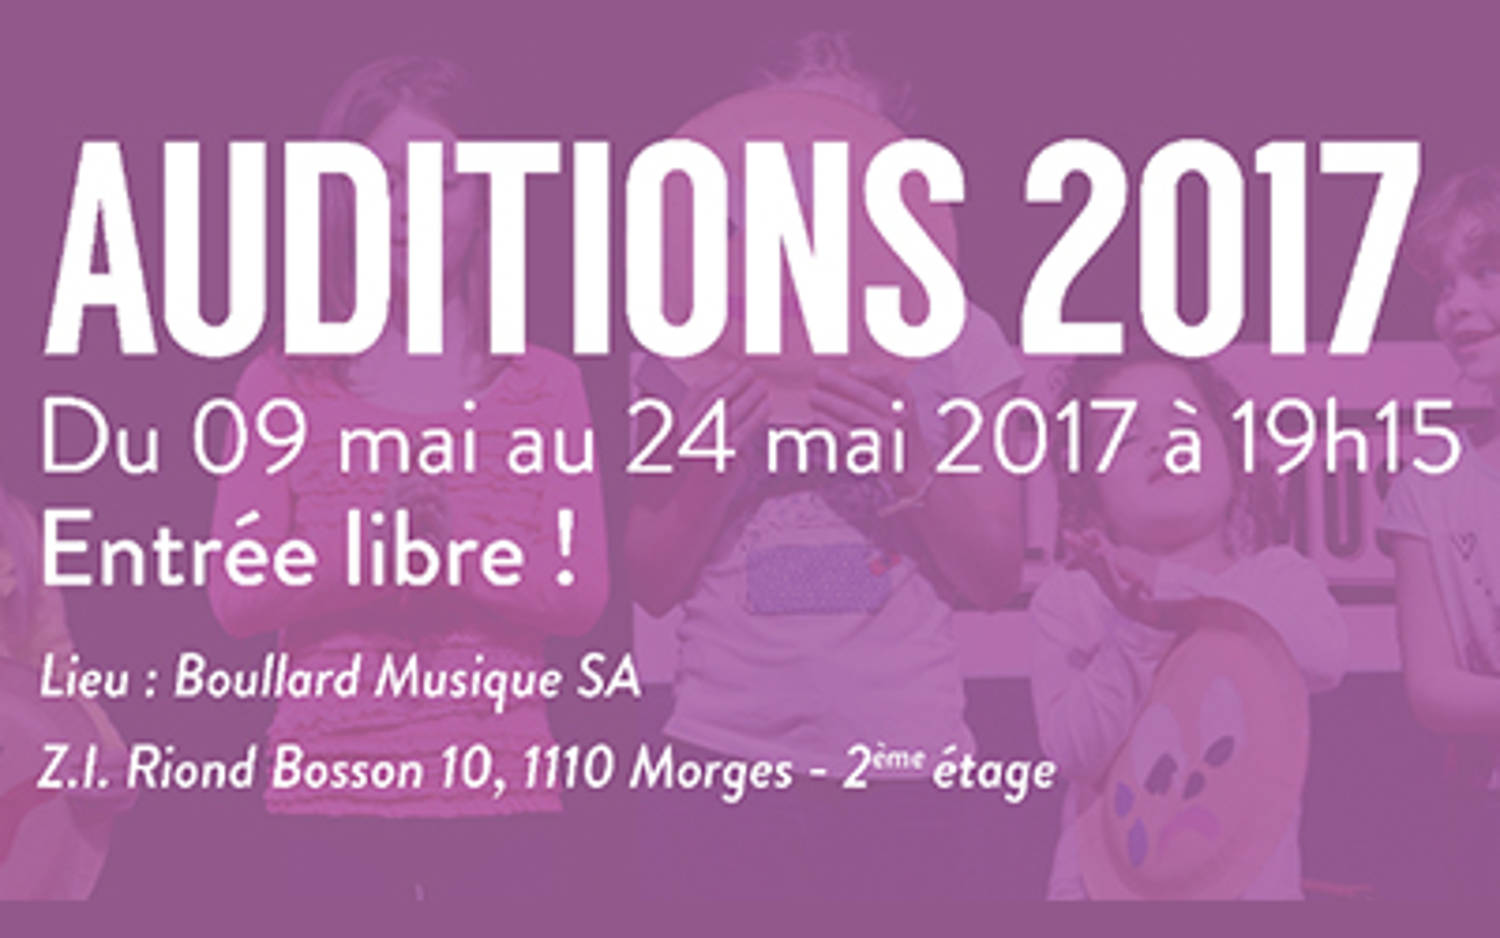 Auditions of the Alain Boullard School of Music